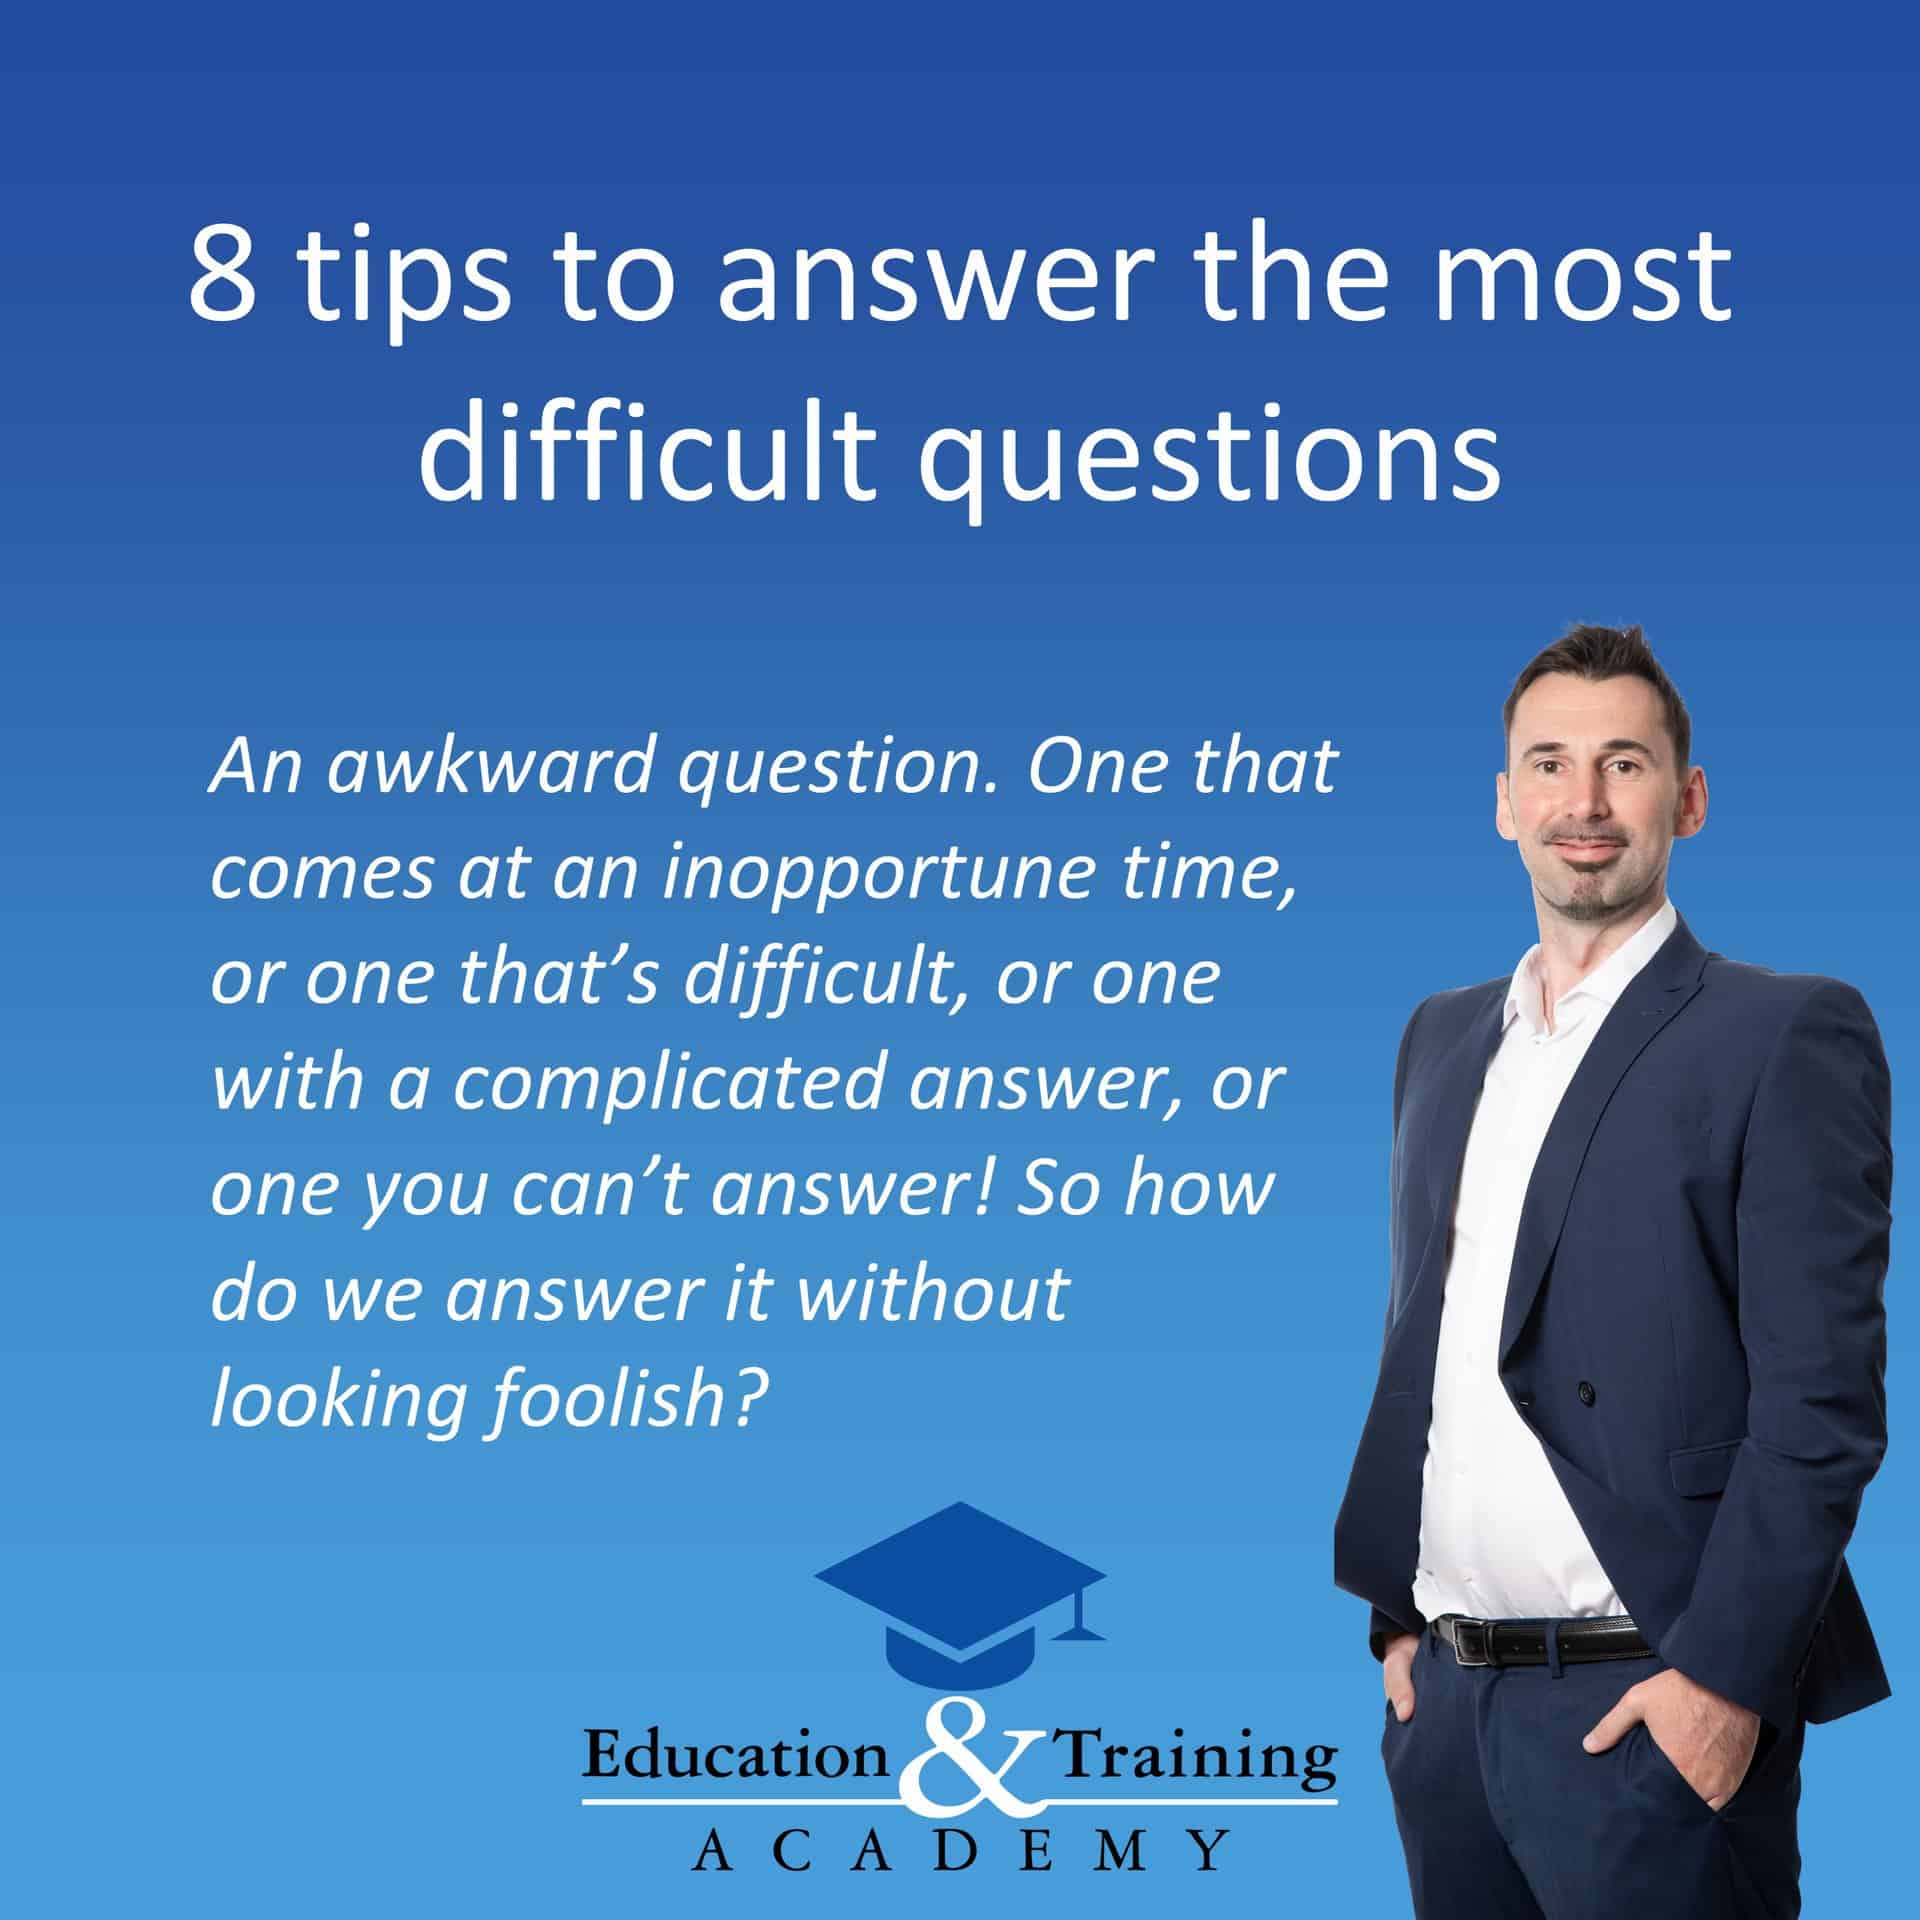 8 tips to deal with difficult questions